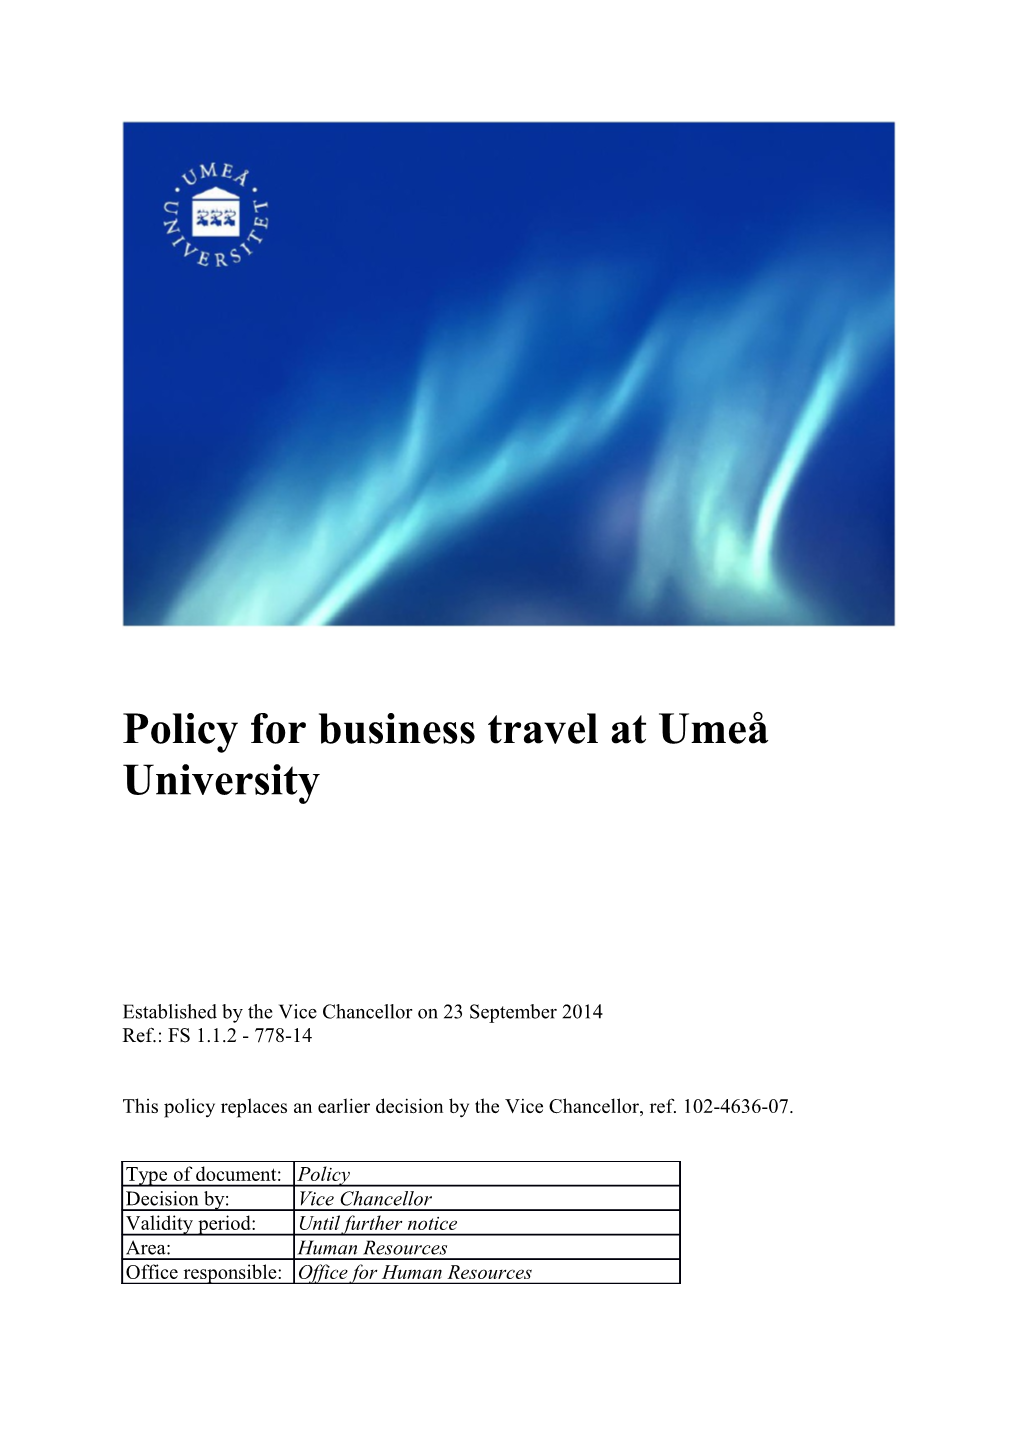 Policy for Business Travel at Umeå University